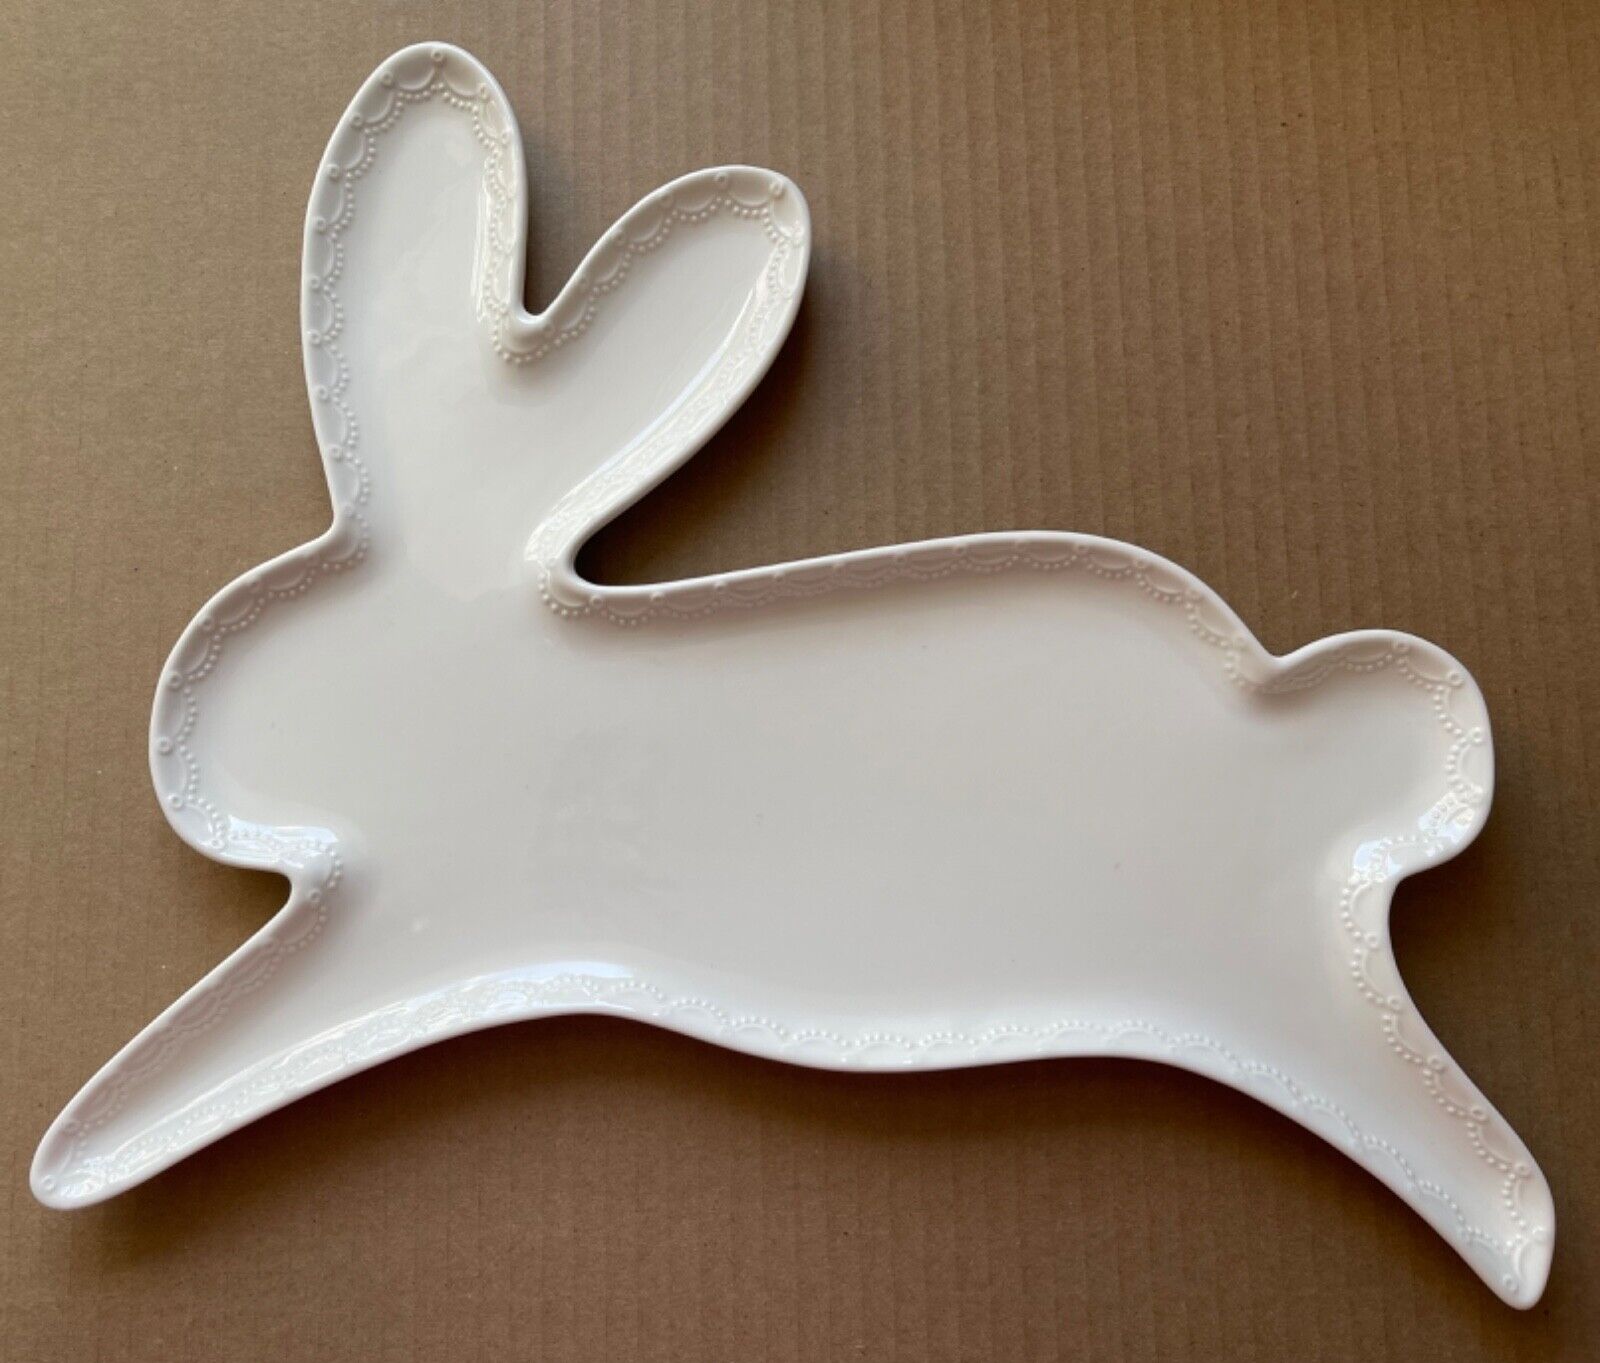 Bunny Rabbit Shaped Serving Plate